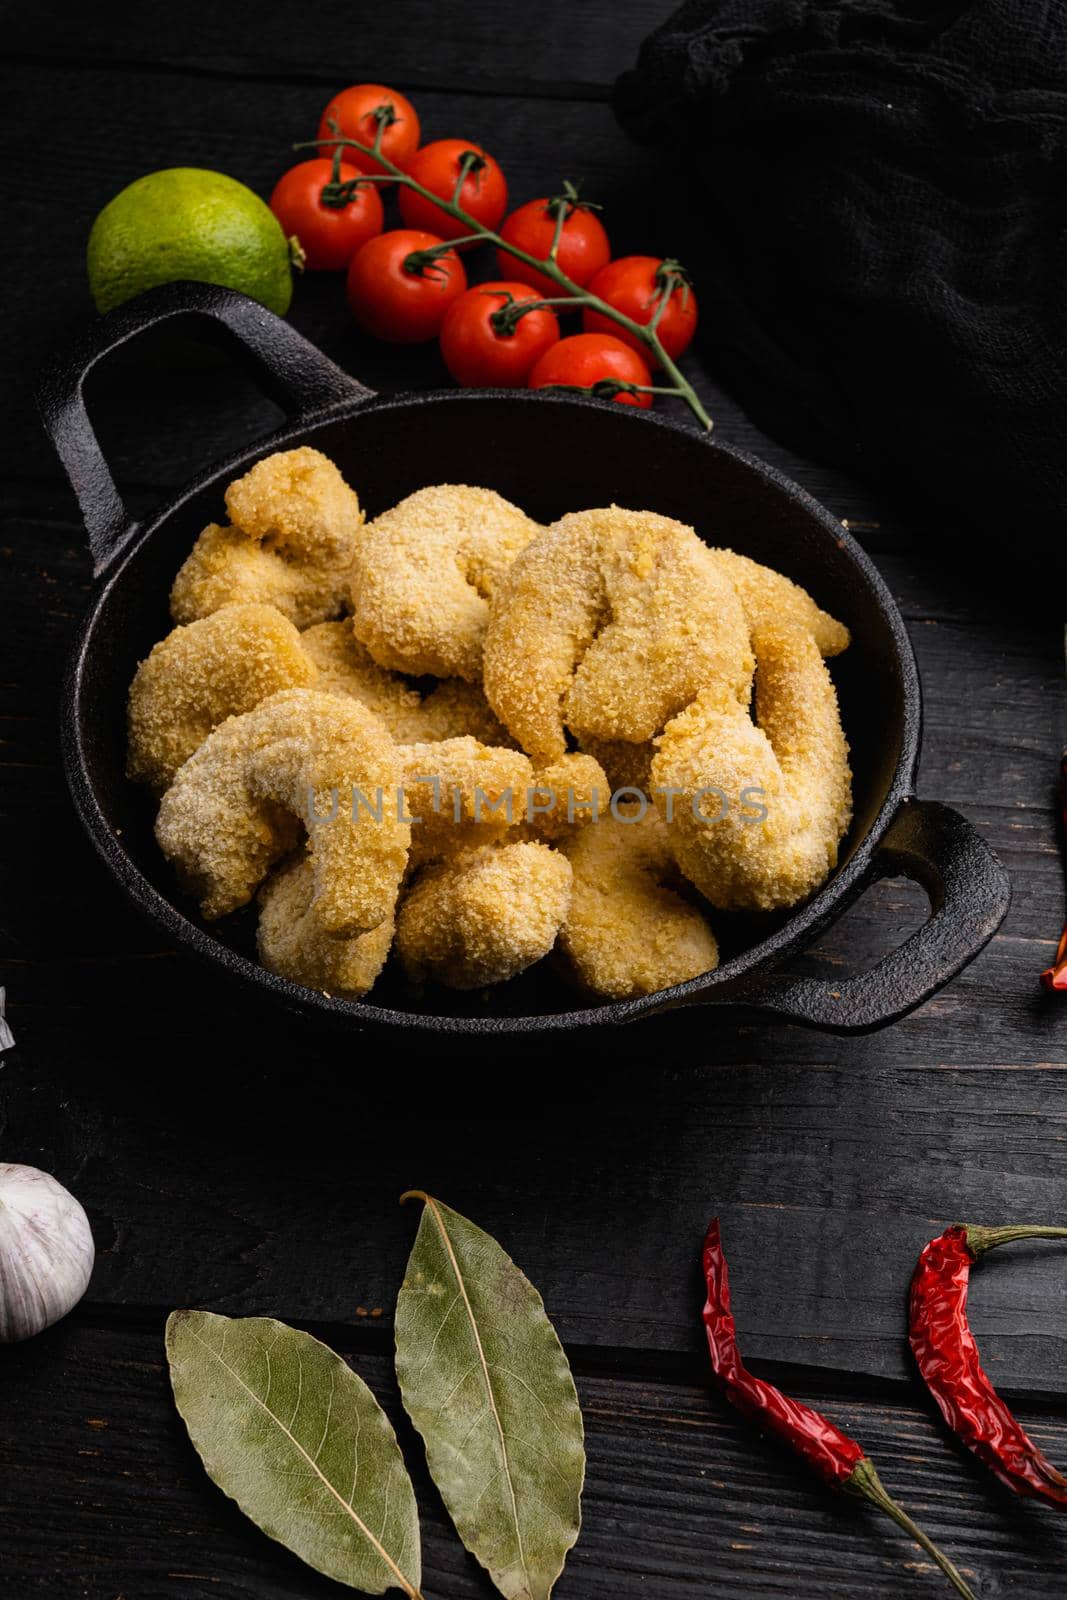 Uncooked shrimps in cheese breading, on black wooden table background by Ilianesolenyi